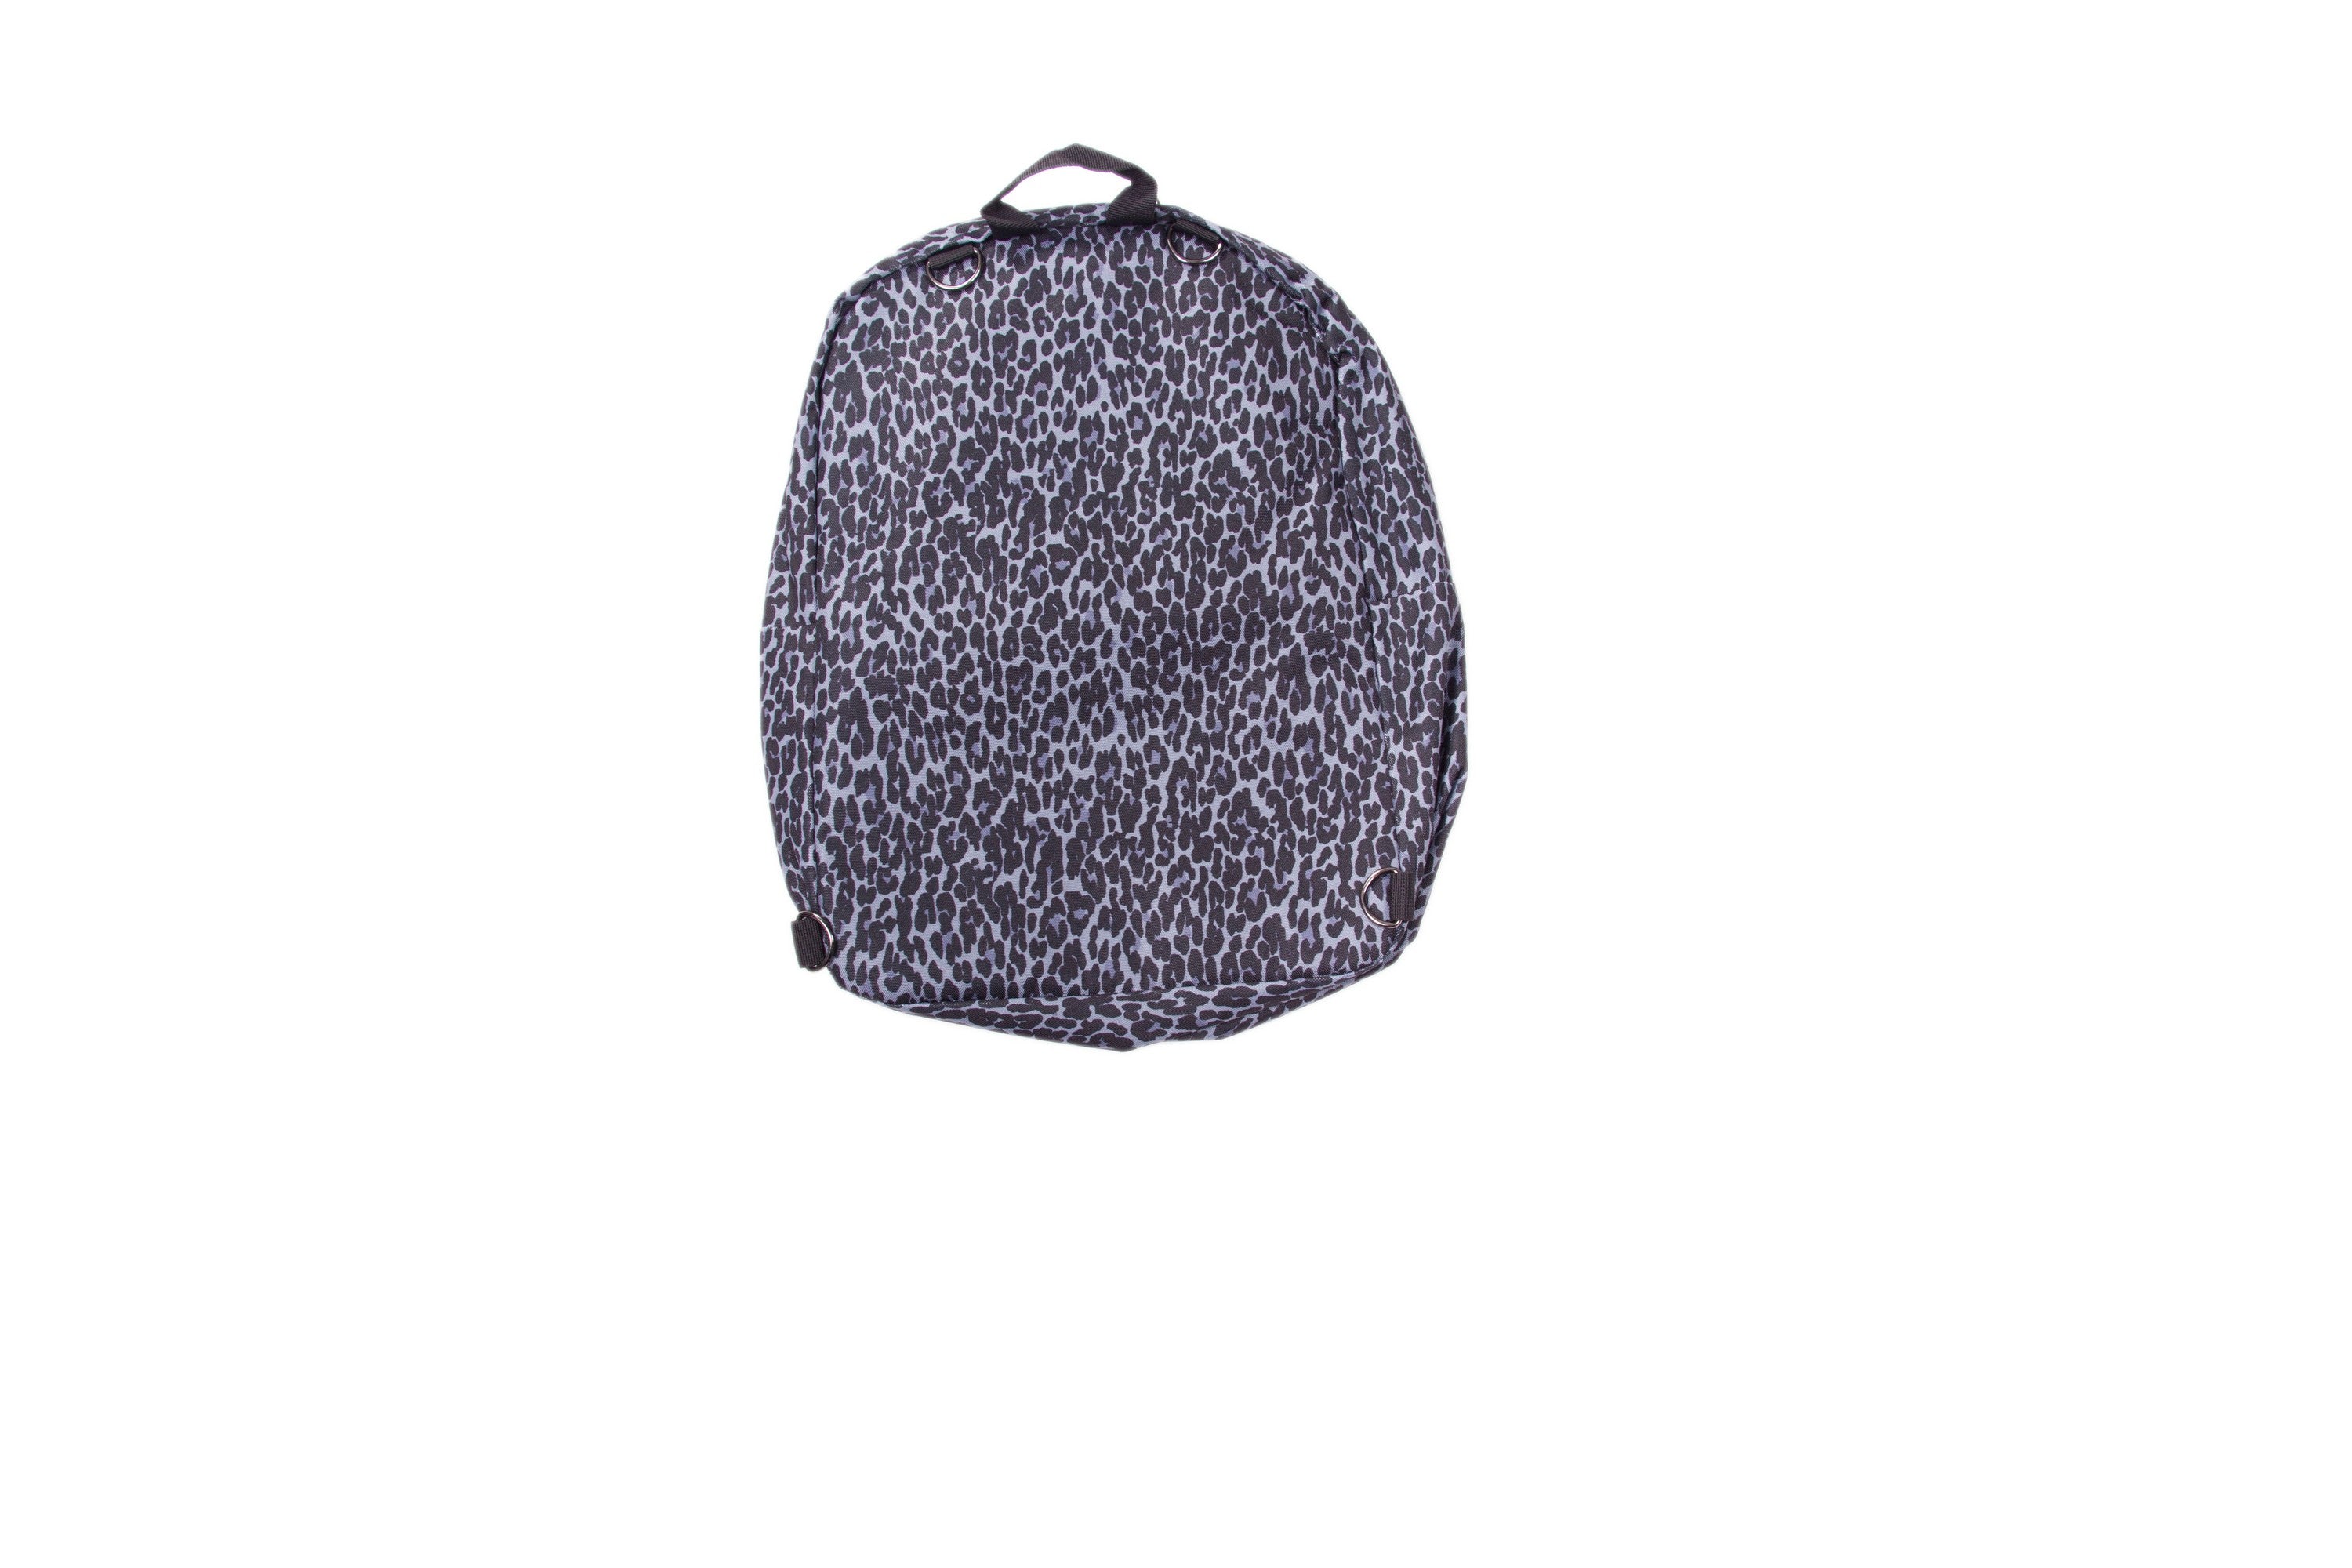 Merse & Company Cheetah System Daypack